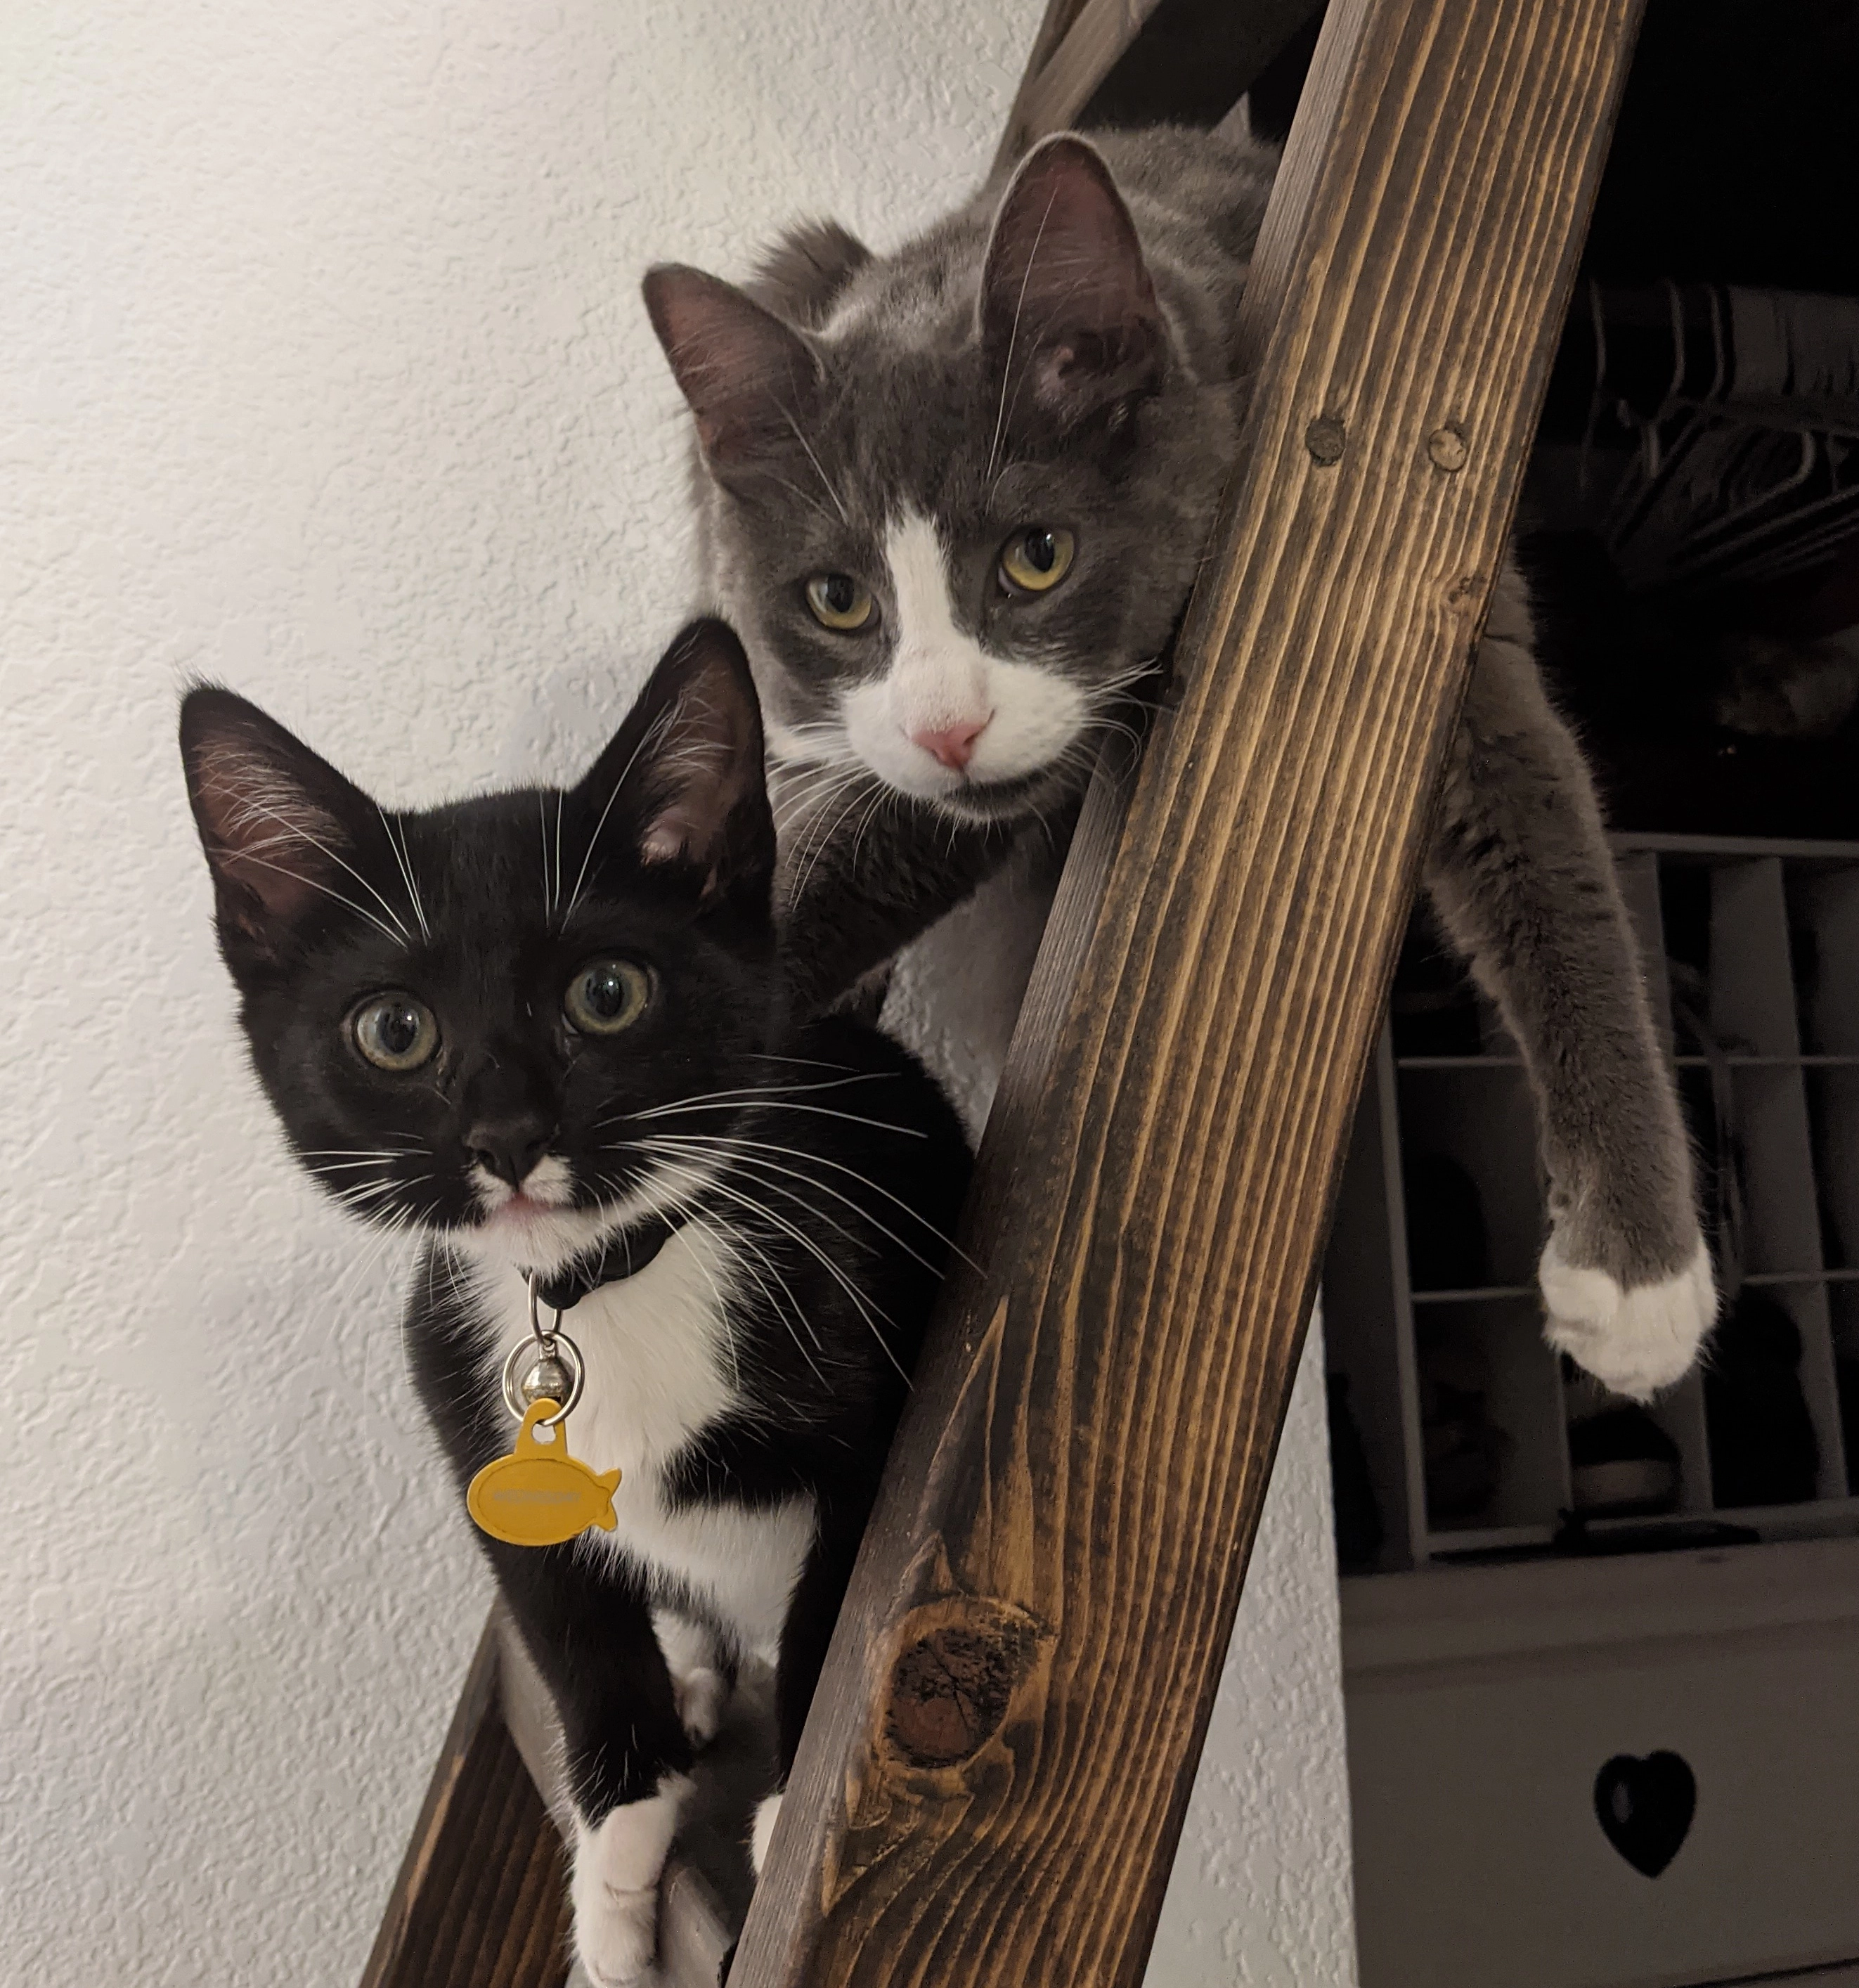 Two tuxedo cats on a ladder.